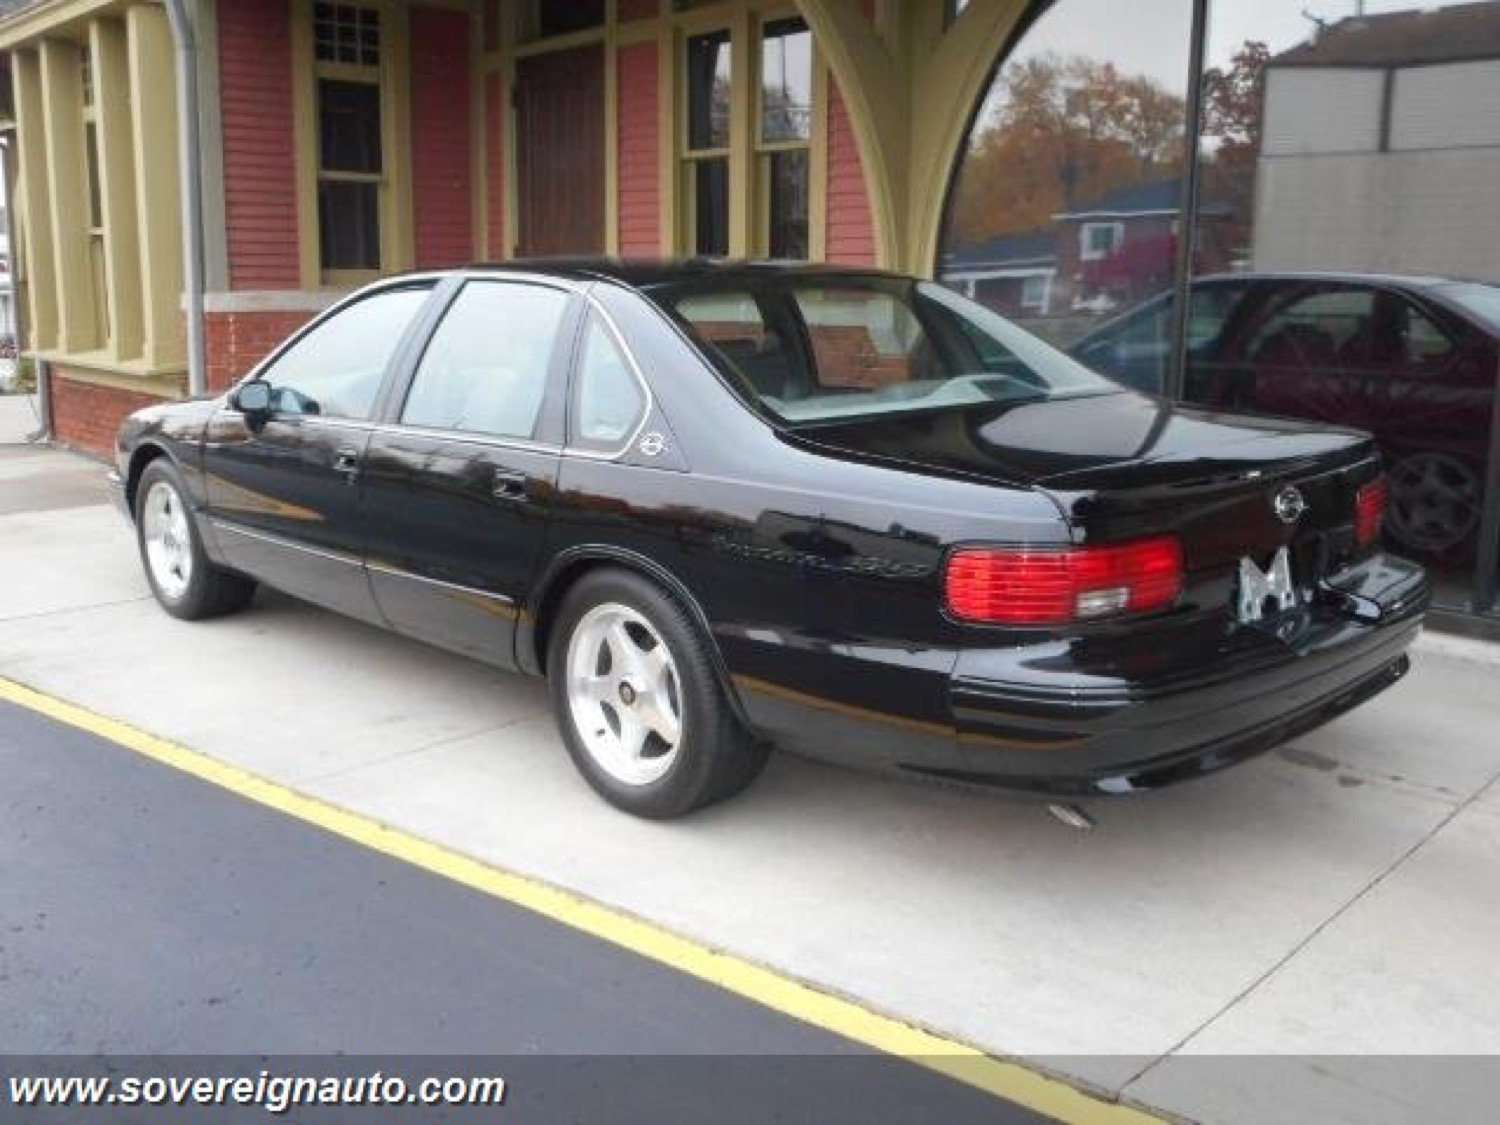 1994 chevrolet impala ss with just 291 miles up for sale gm authority 1994 chevrolet impala ss with just 291